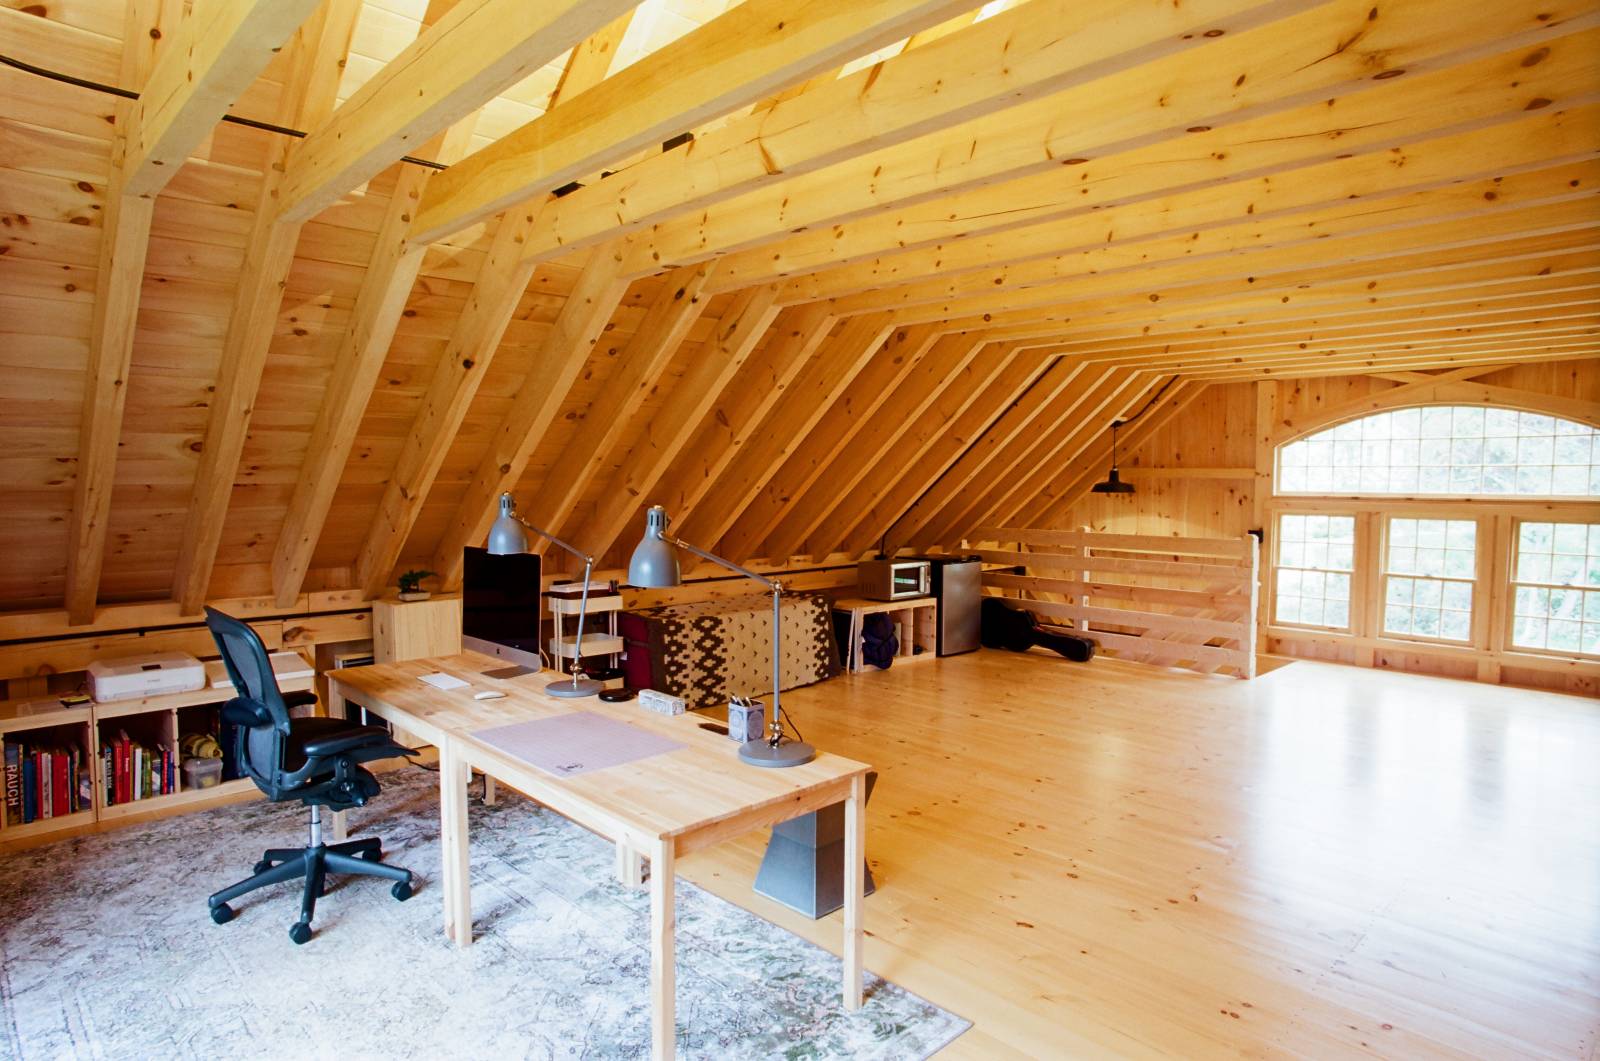 Inside the post & beam barn upstairs is this 26' x 32' office/studio space